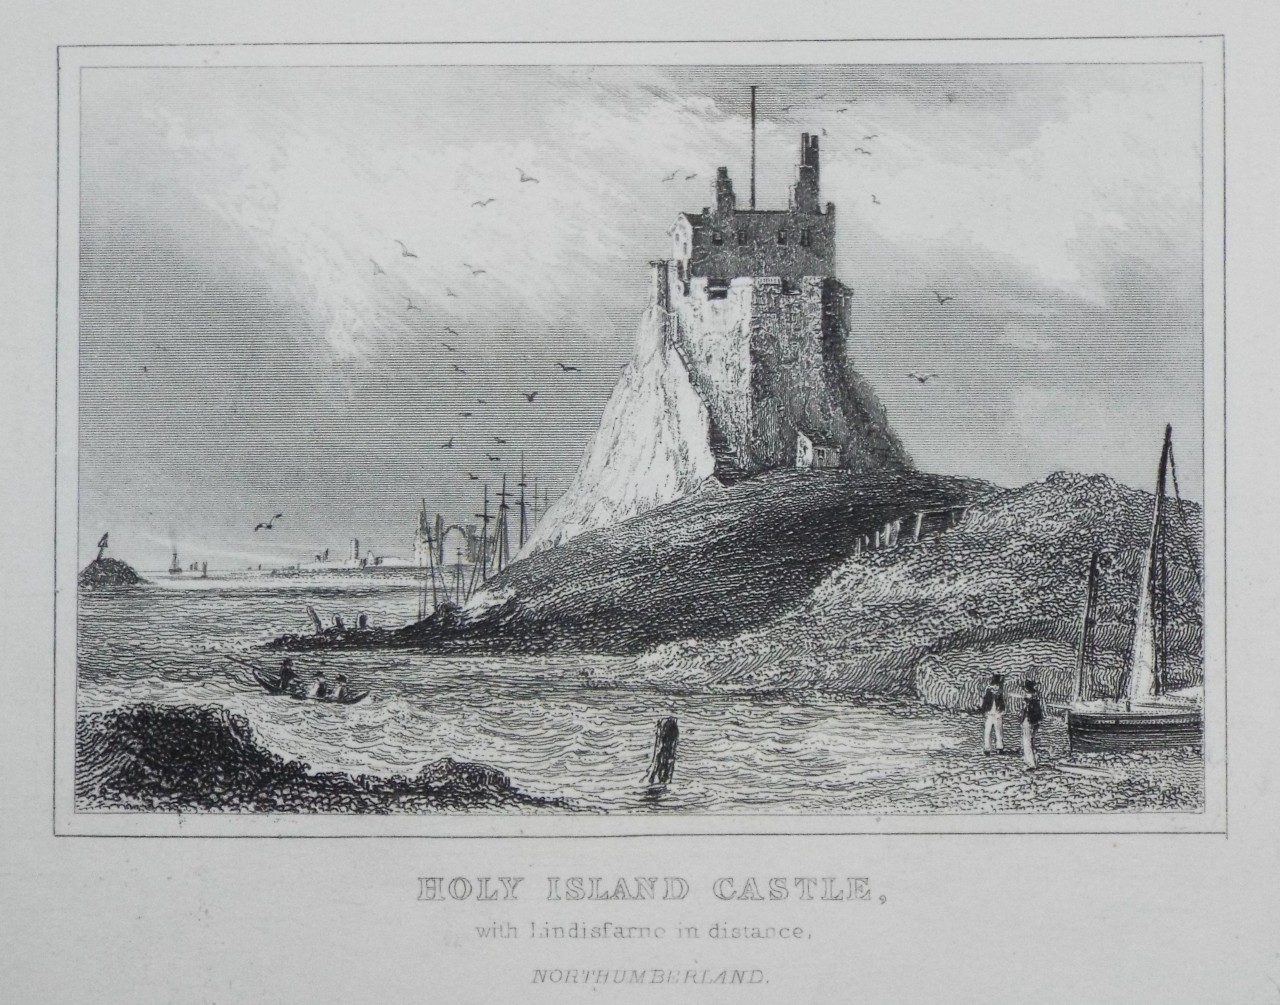 Print - Holy Island Castle, with Lindisfarne in distance, Northumberland.